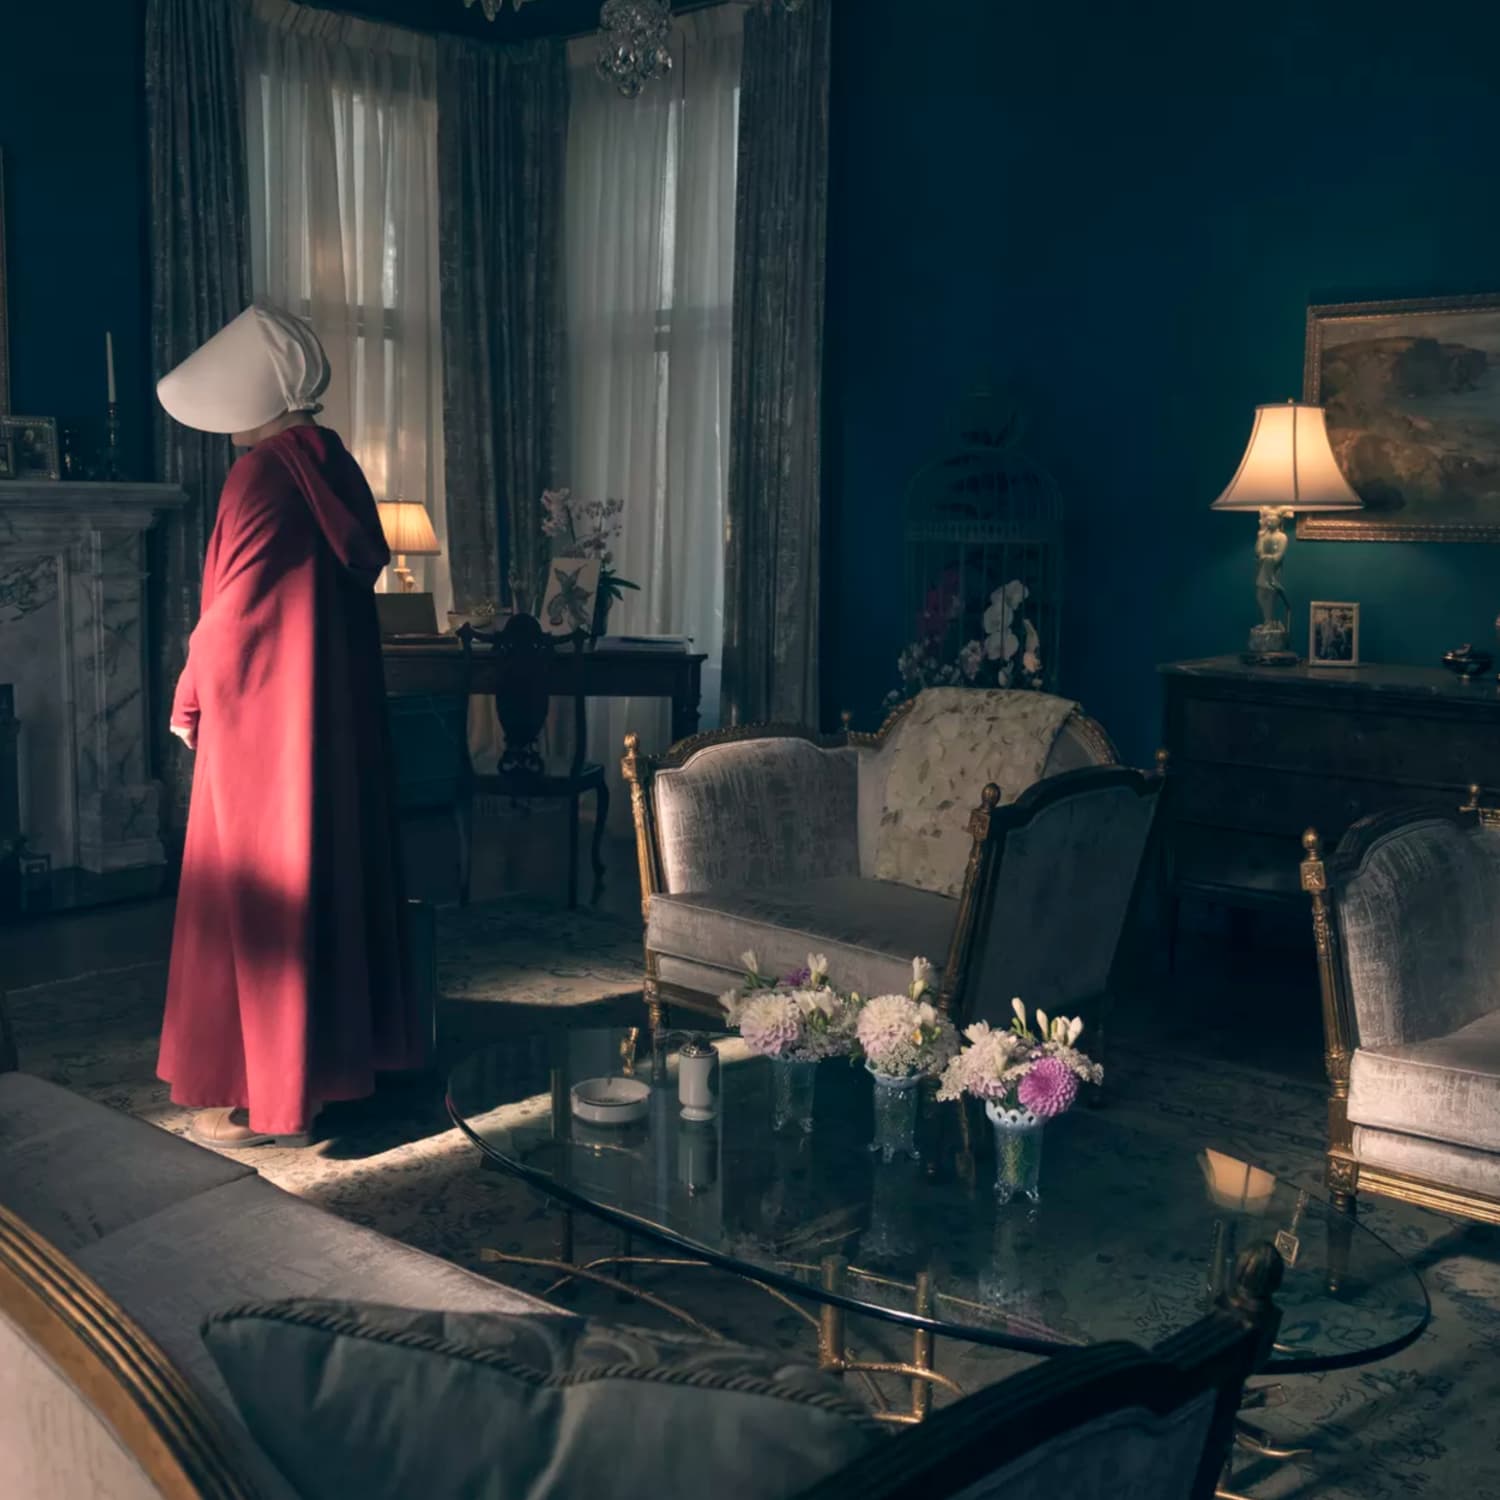 Peek Inside the 19th-Century Mansion From 'The Handmaid's Tale